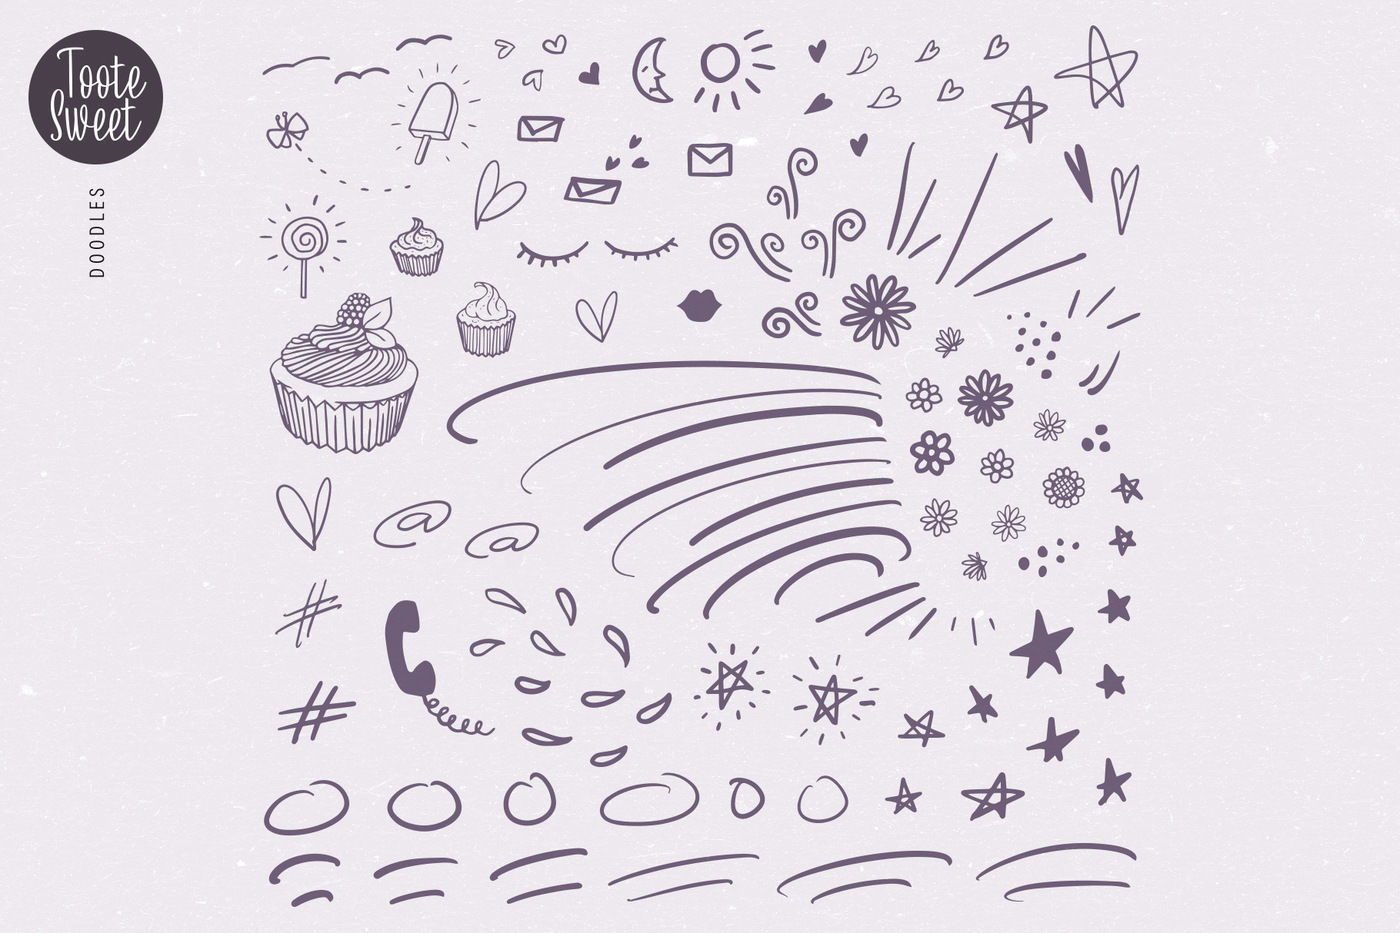 Toote Sweet A Condensed Script Extra Doodles By Ayca Atalay Creative Thehungryjpeg Com